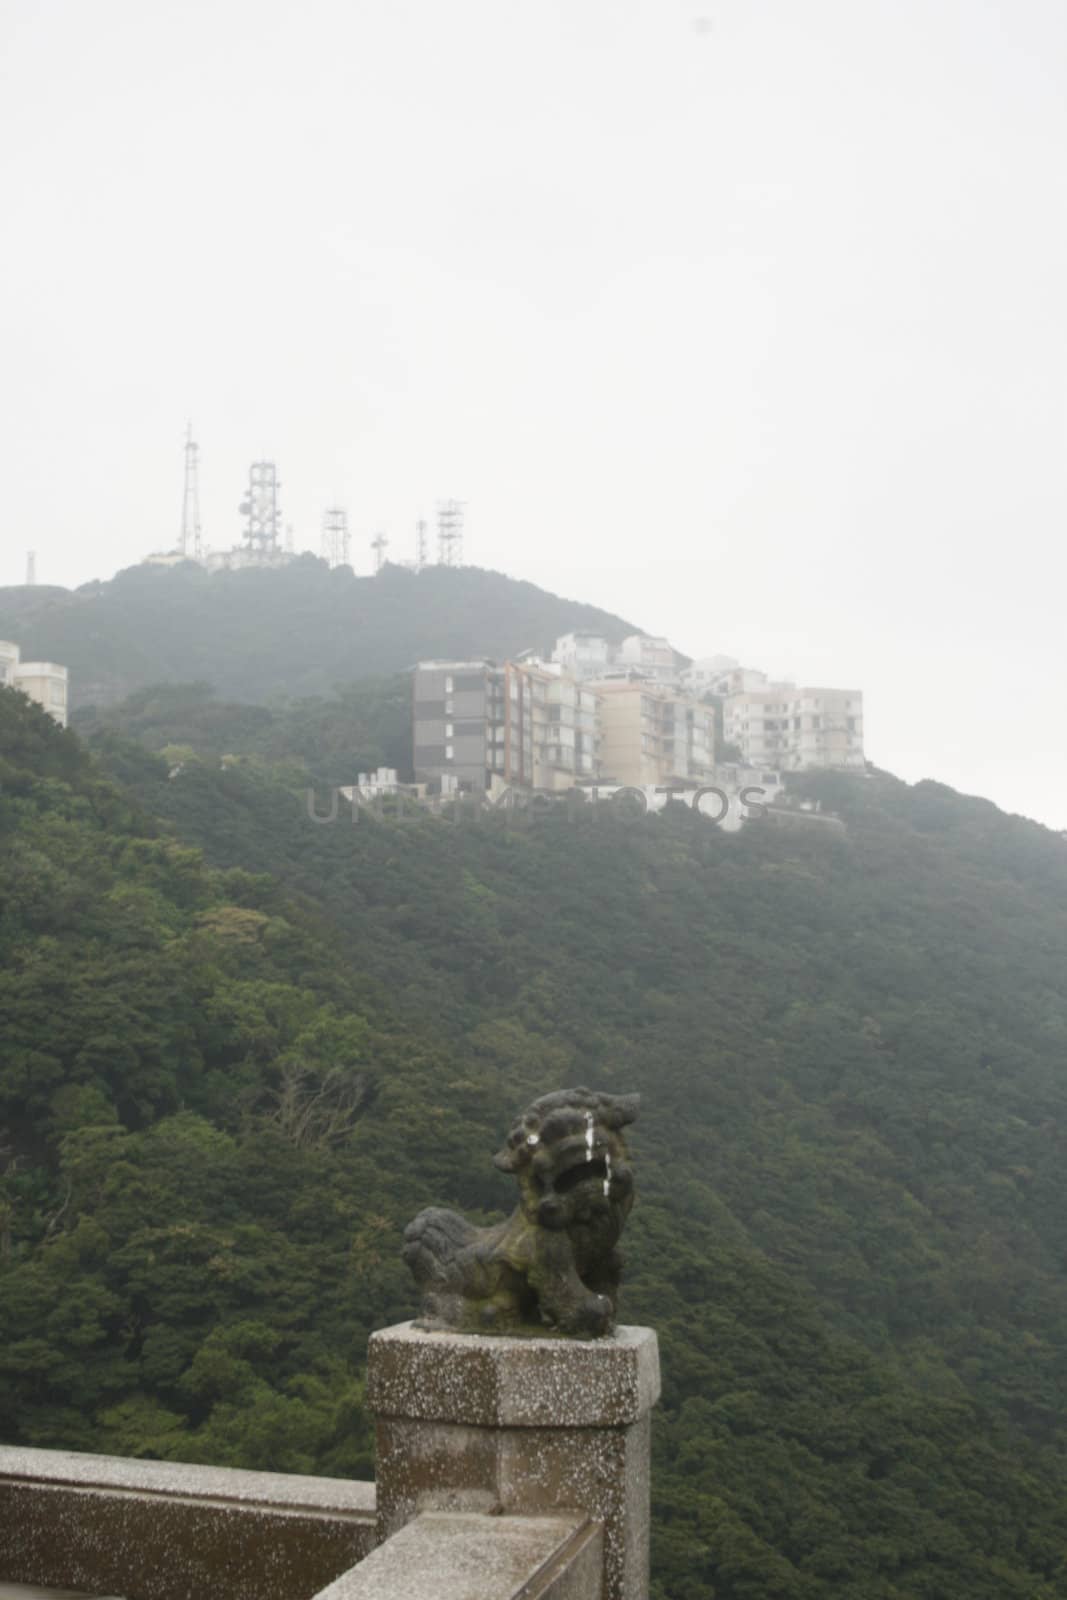 View from the Peak in Hong Kong in the area with s by koep